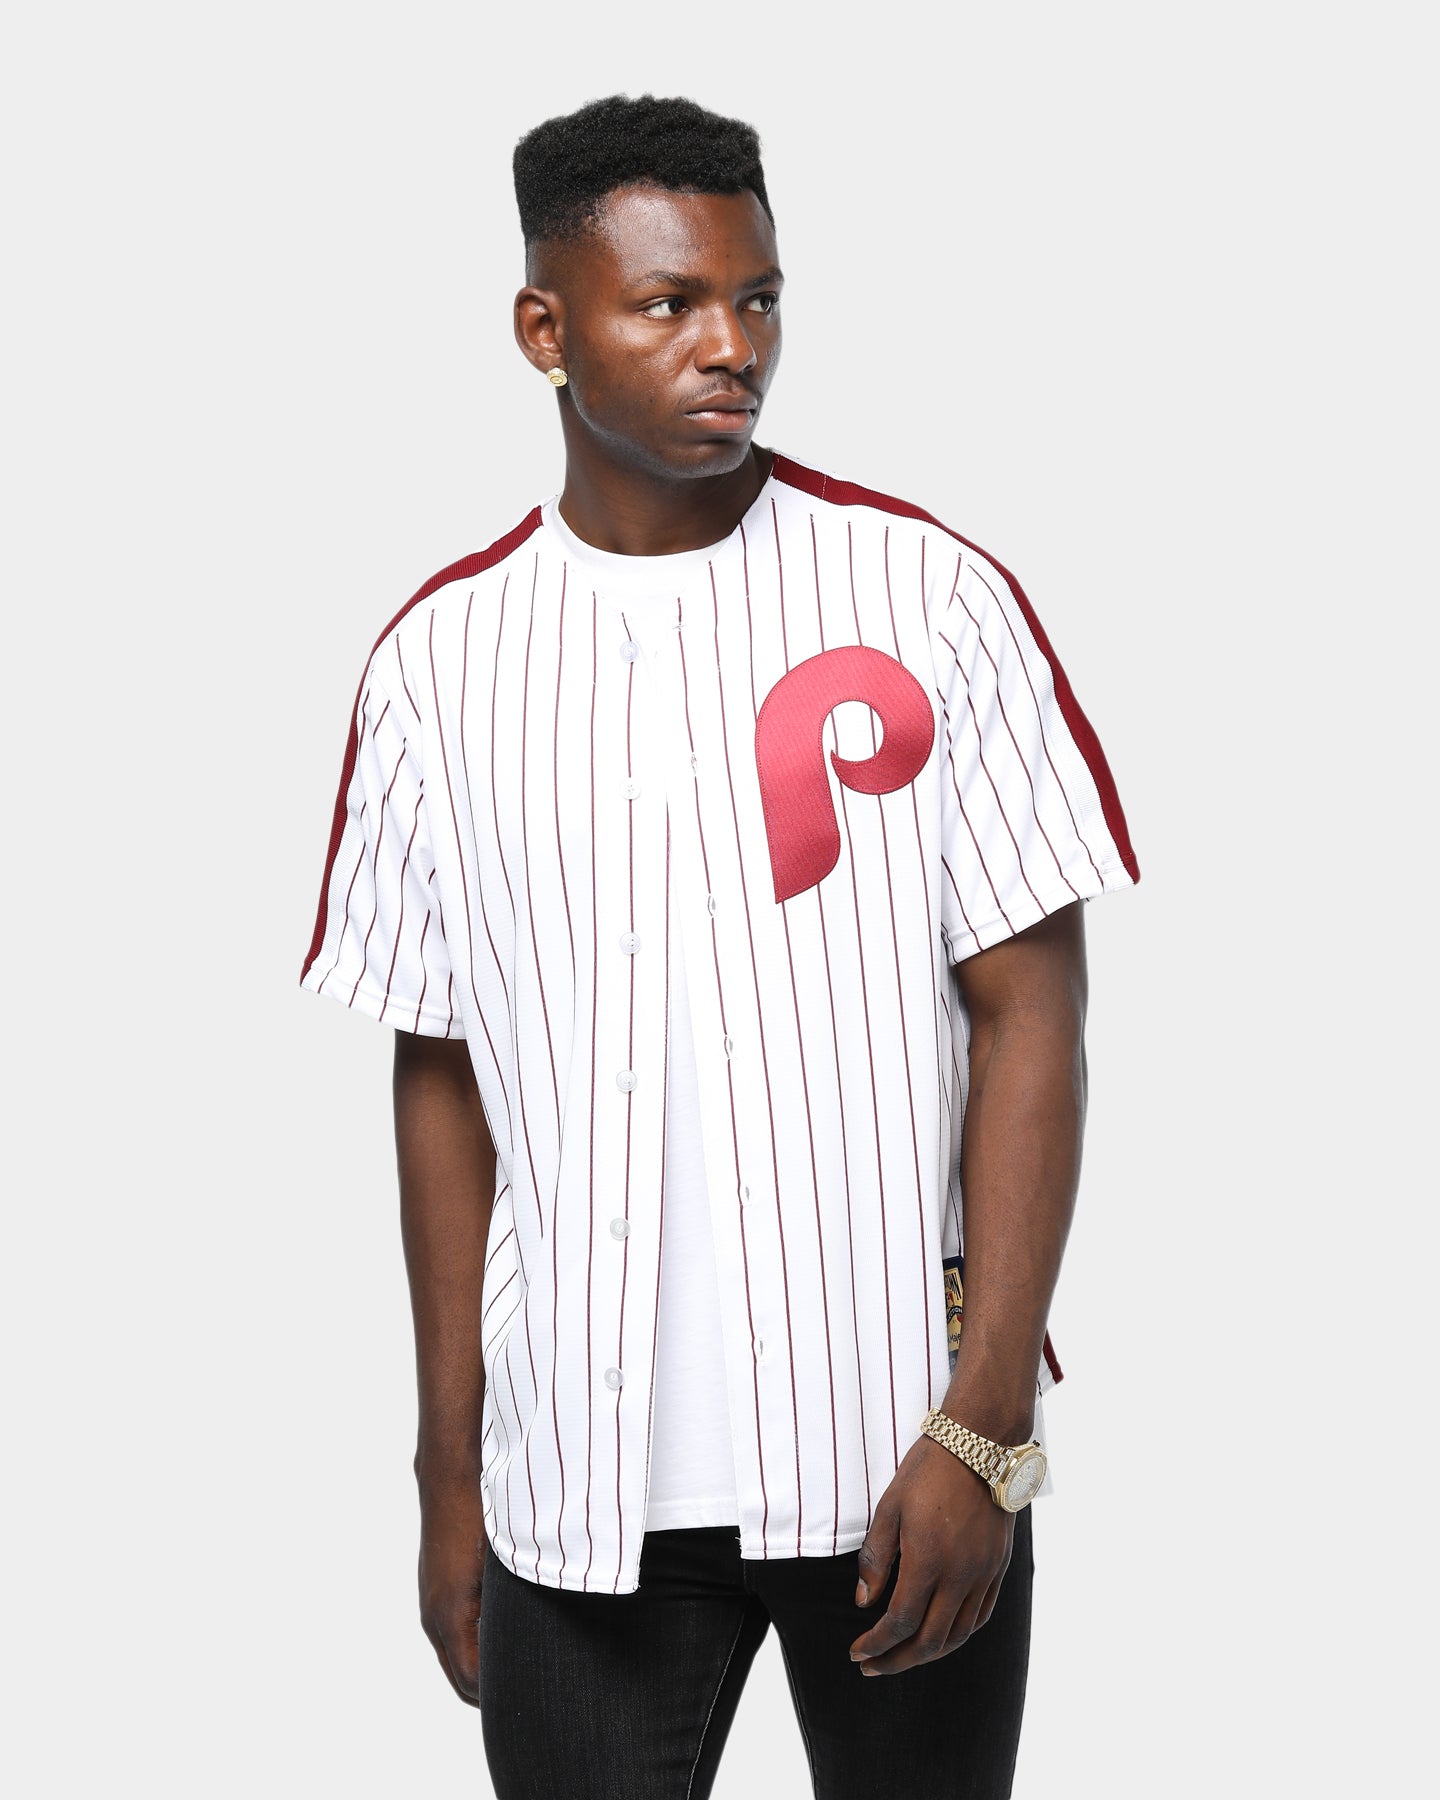 phillies cool base jersey